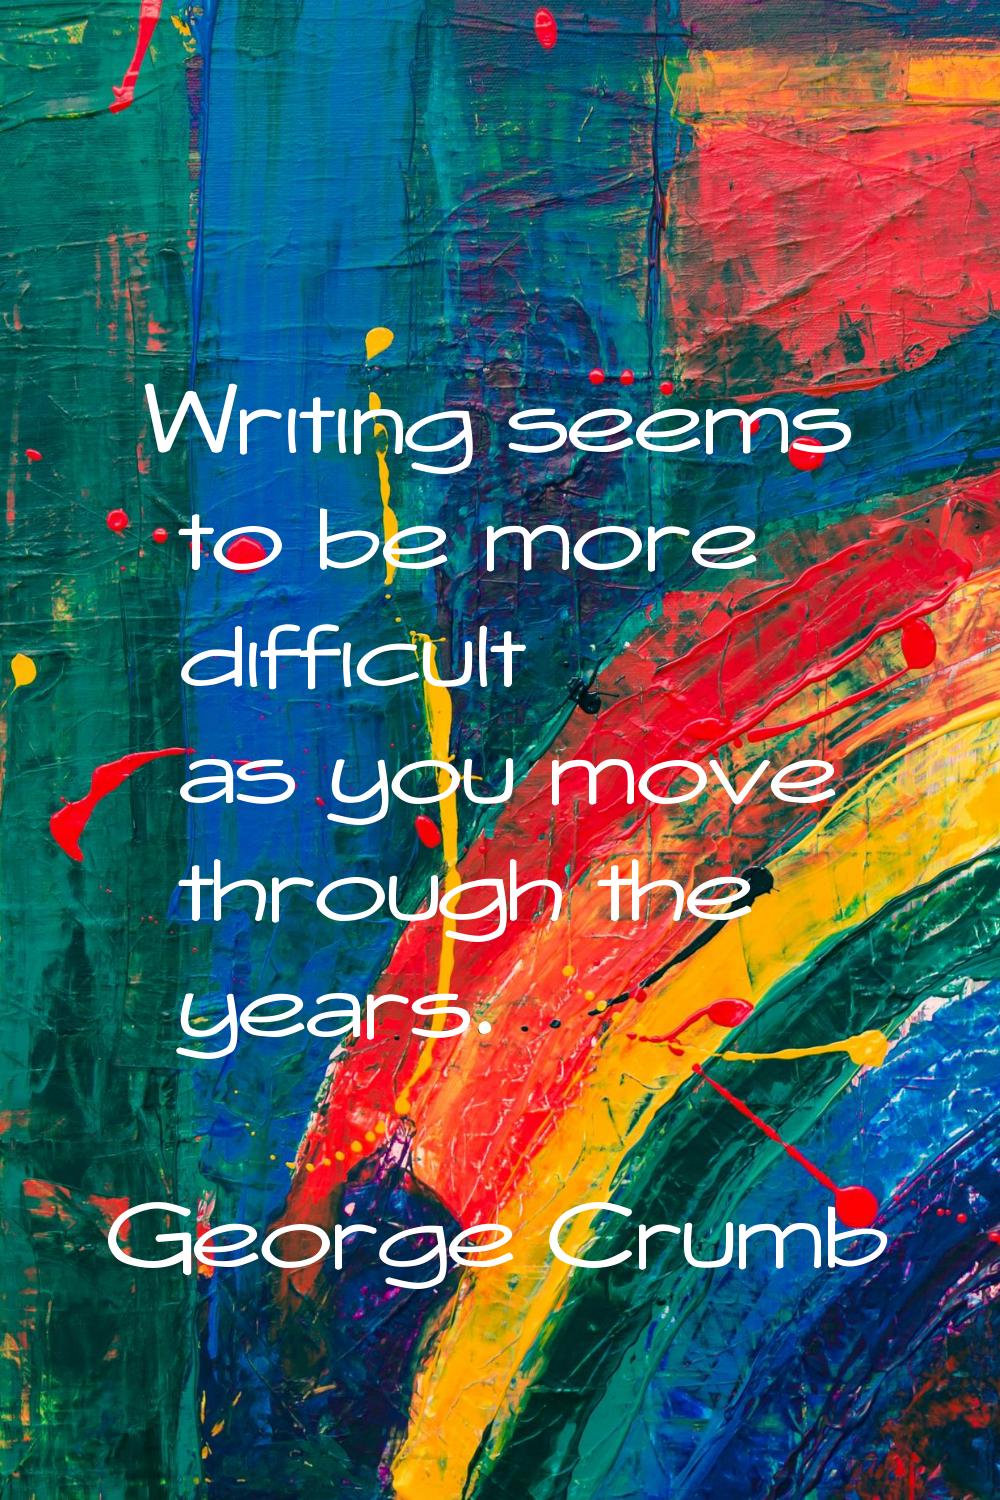 Writing seems to be more difficult as you move through the years.